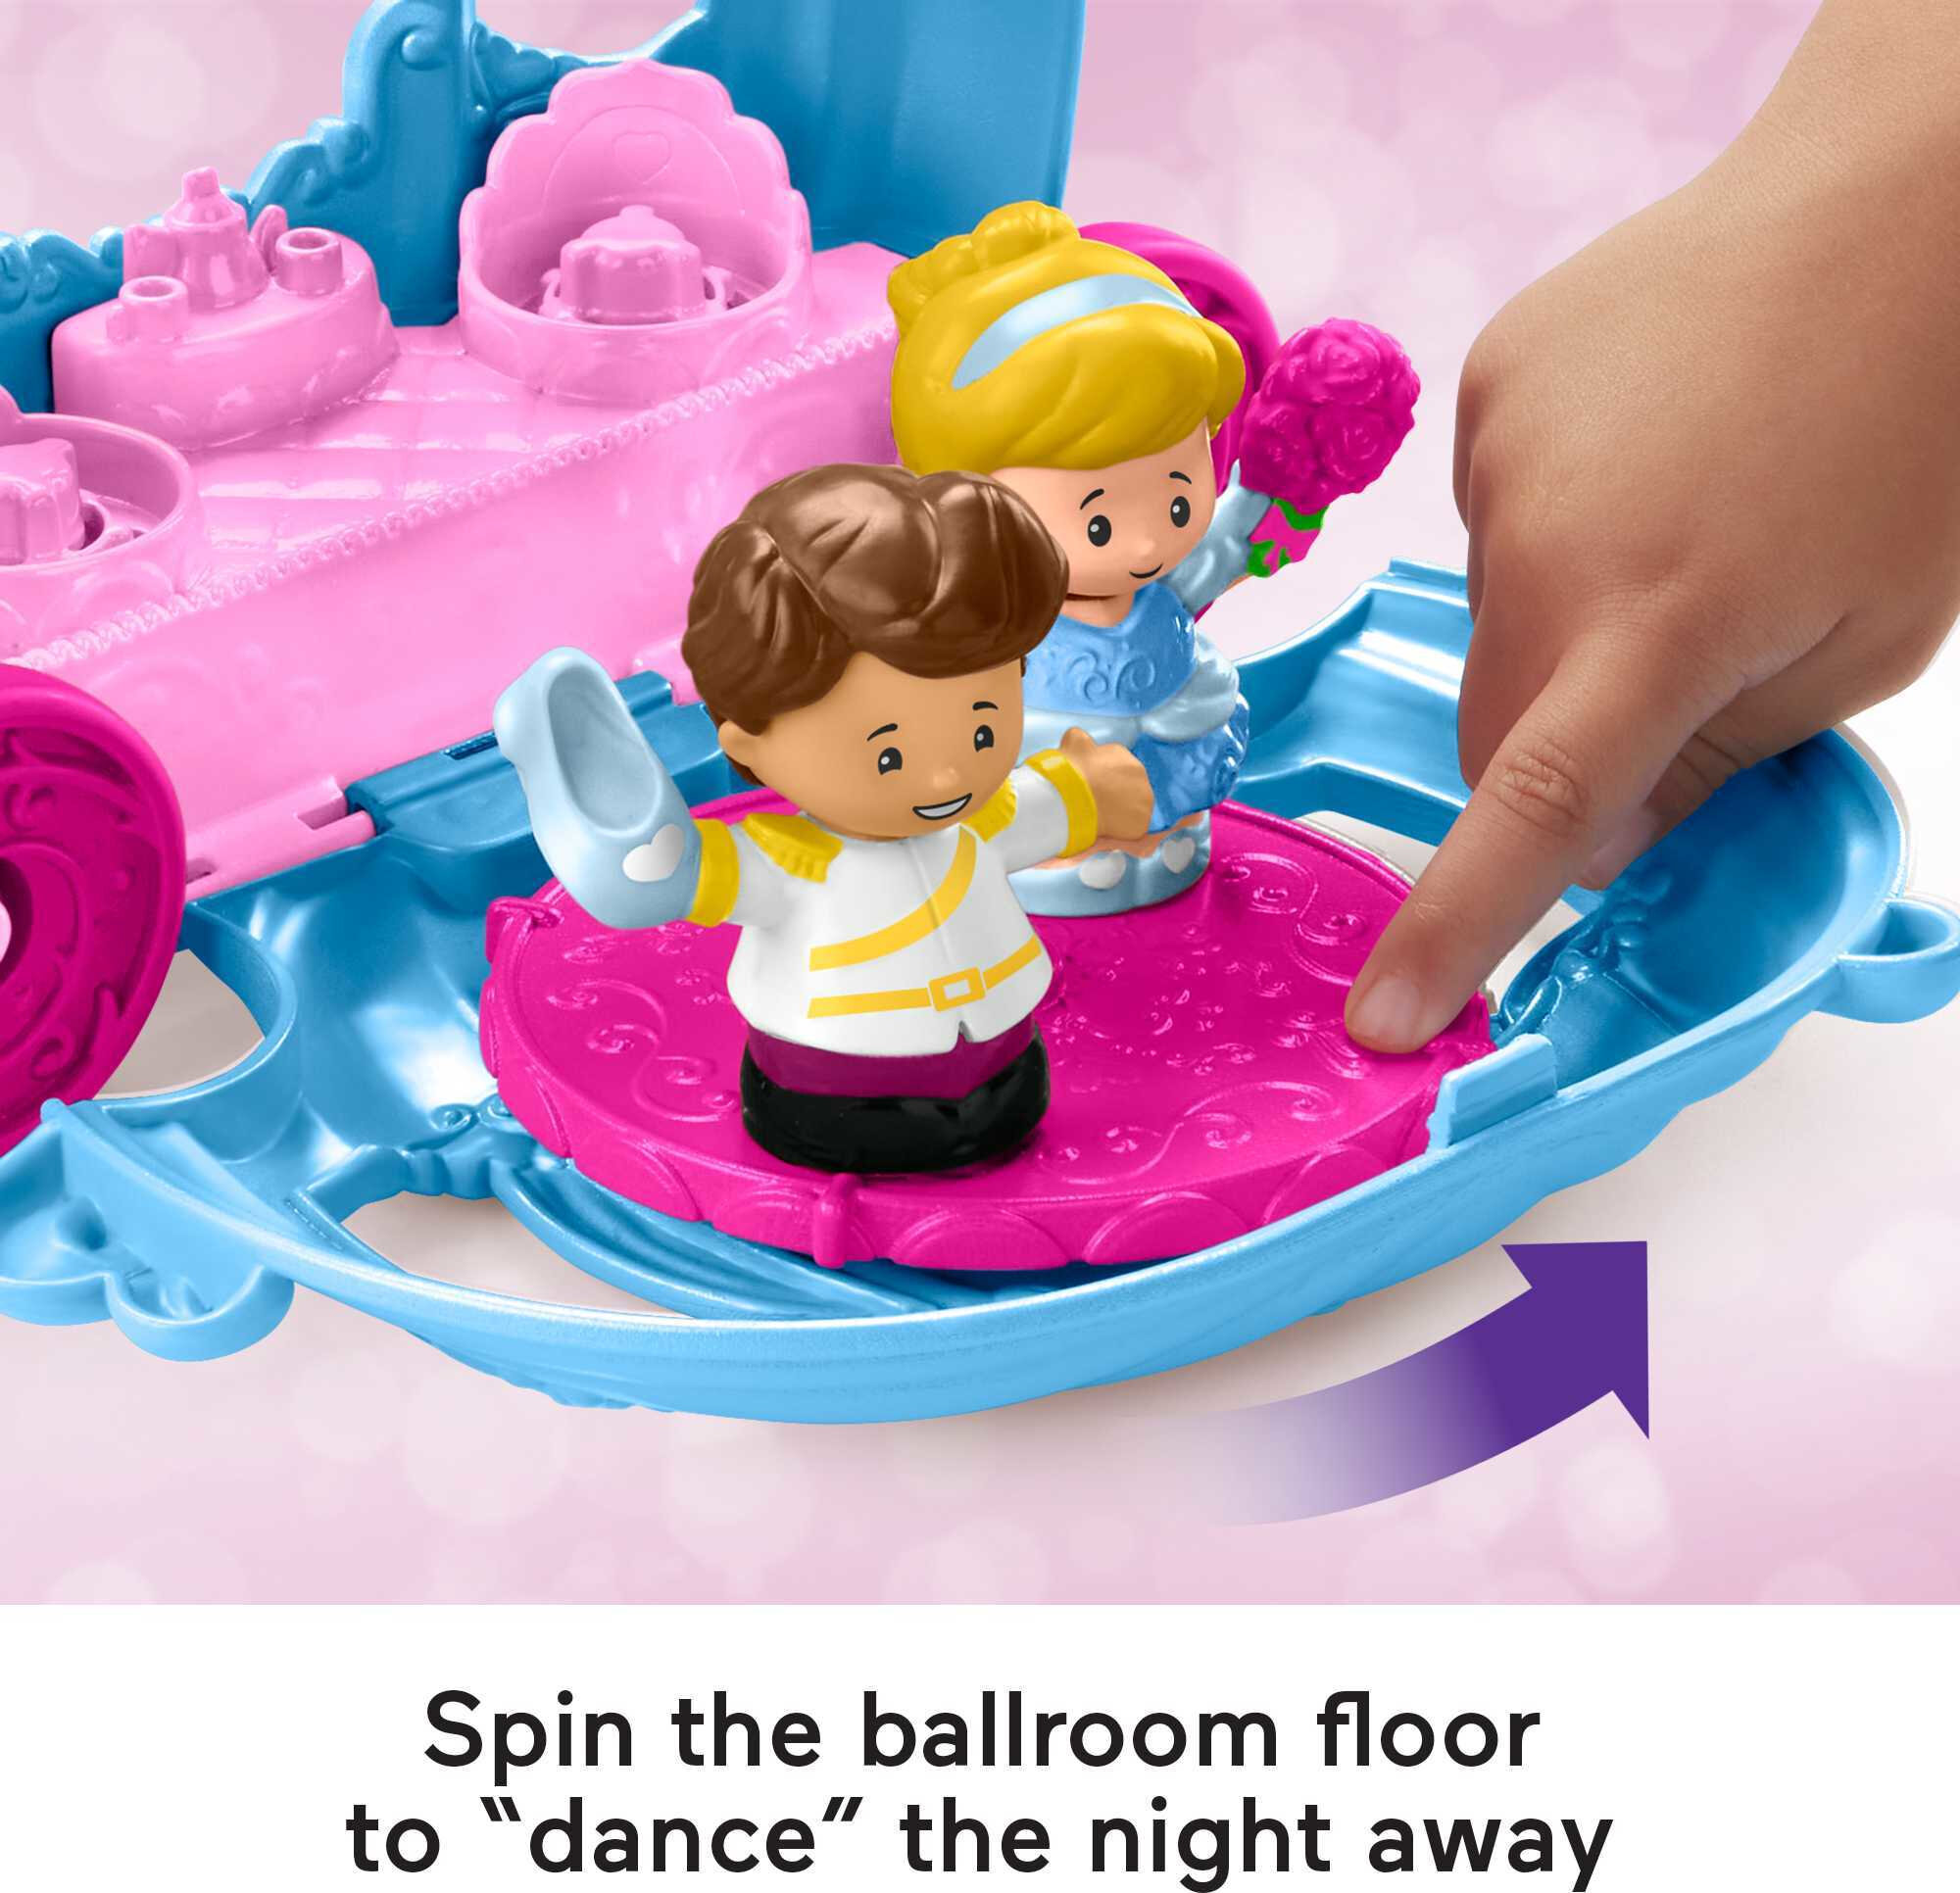 Disney Princess Cinderella’s Dancing Carriage Little People Toddler Playset with Horse & Figures - image 3 of 6